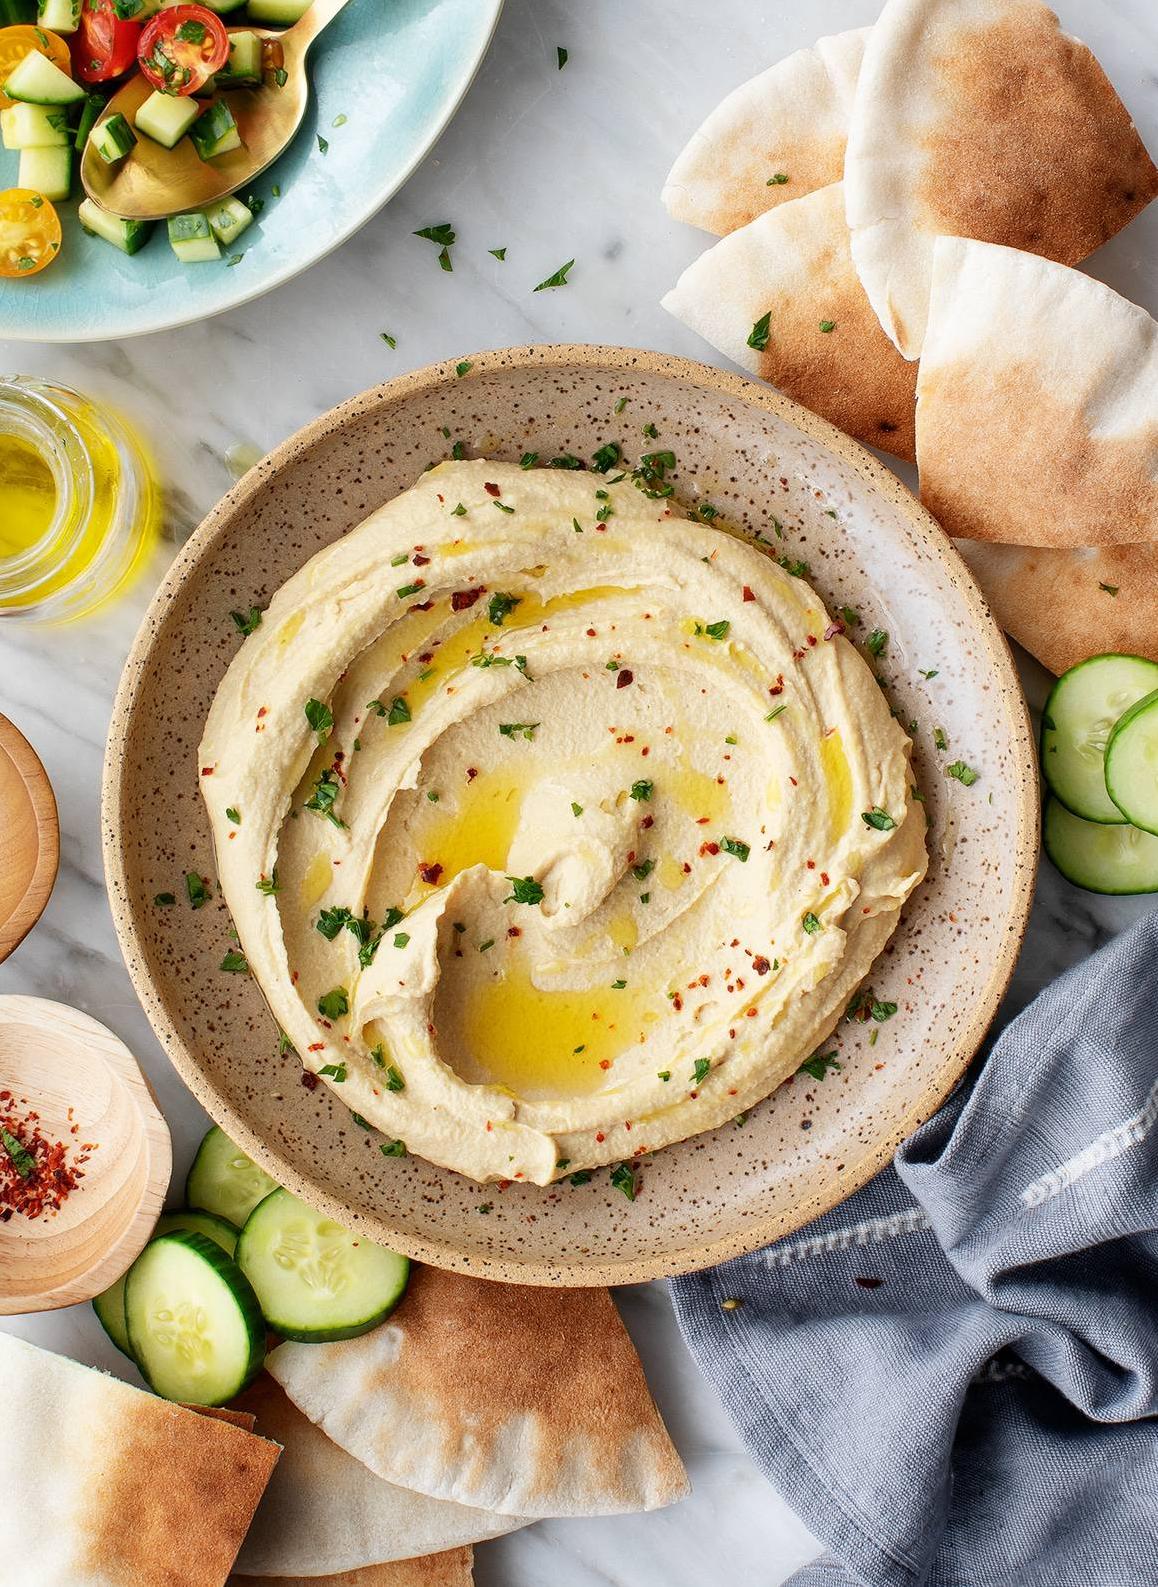  Nothing beats homemade hummus that you can tweak to your liking.